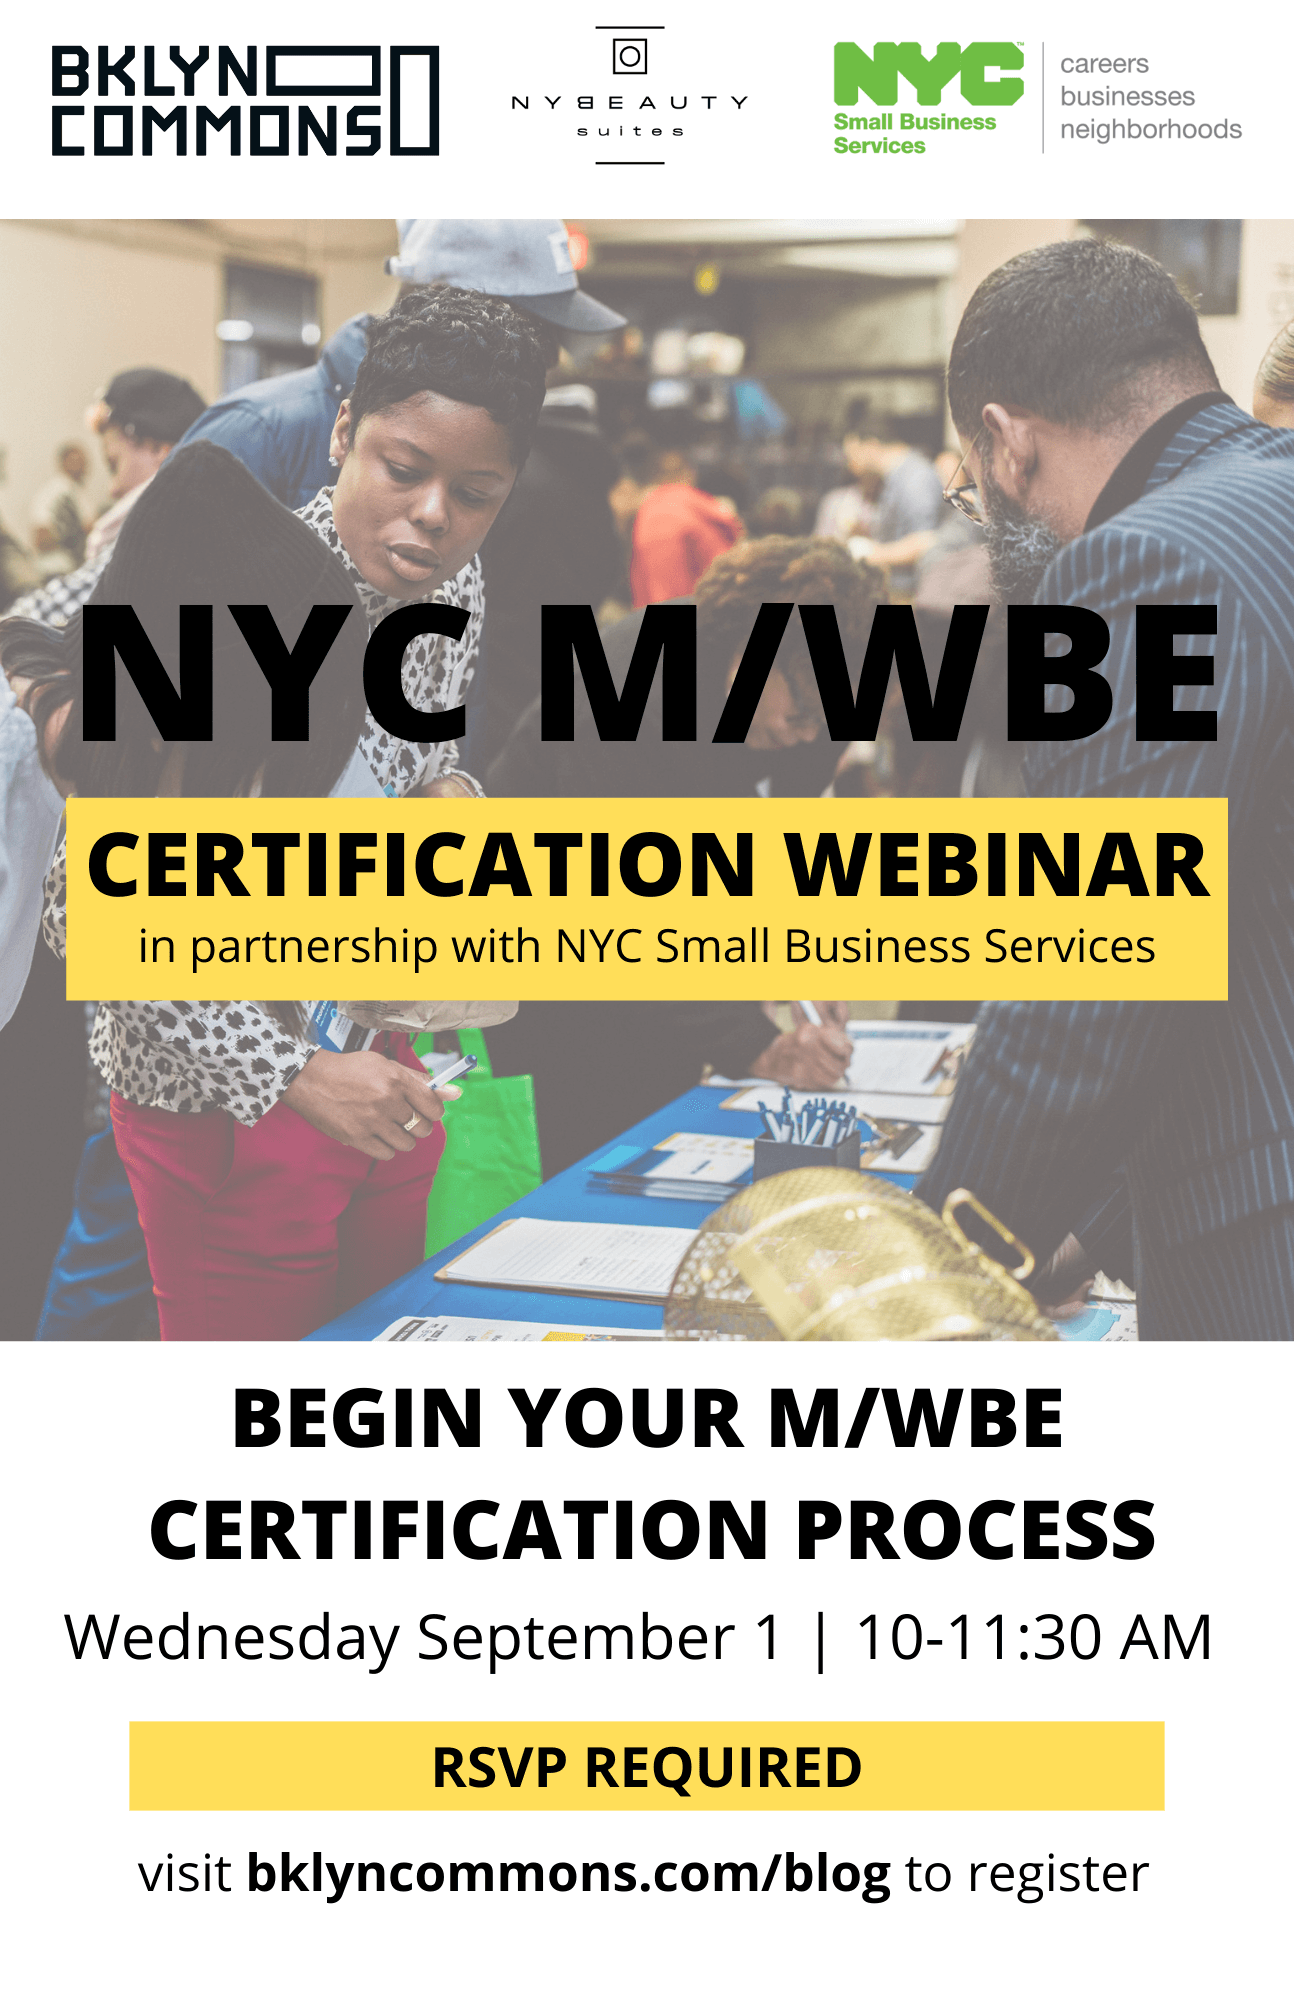 nyc-mwbe-certification-webinar-bklyn-commons-nyc-department-of-small-business-services